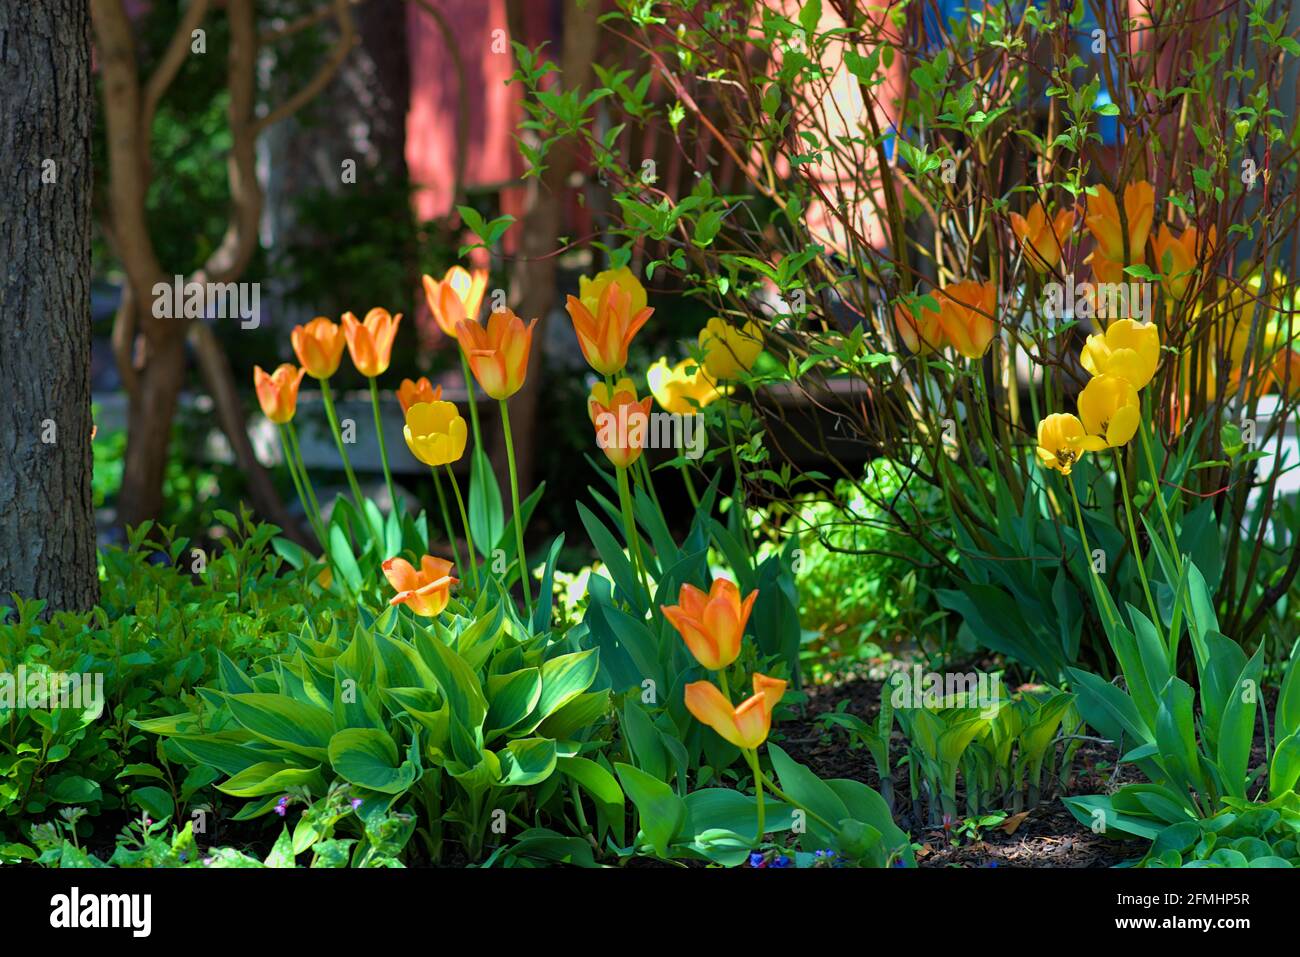 Orange and yellow tulips (unknown cultivar) blooming in a shady Glebe garden in late spring in Ottawa, Ontario, Canada. Stock Photo